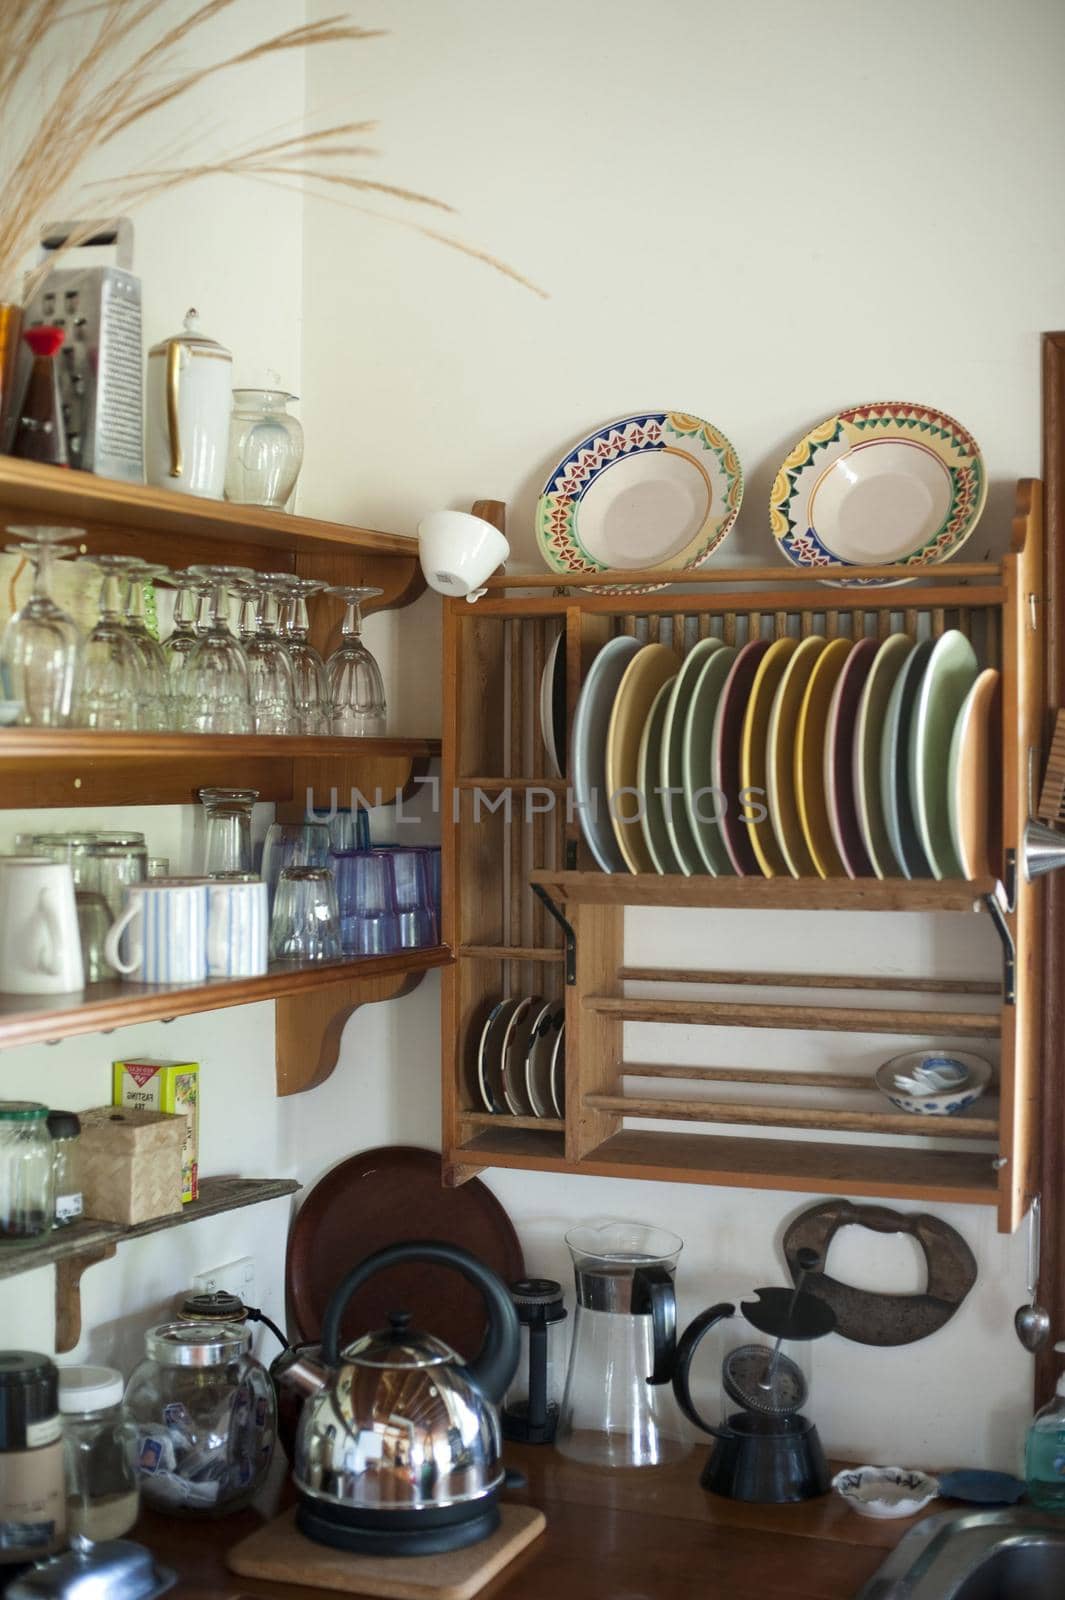 Country kitchen with glassware and crockery displayed on open wooden shelves and small appliances on a wooden counter